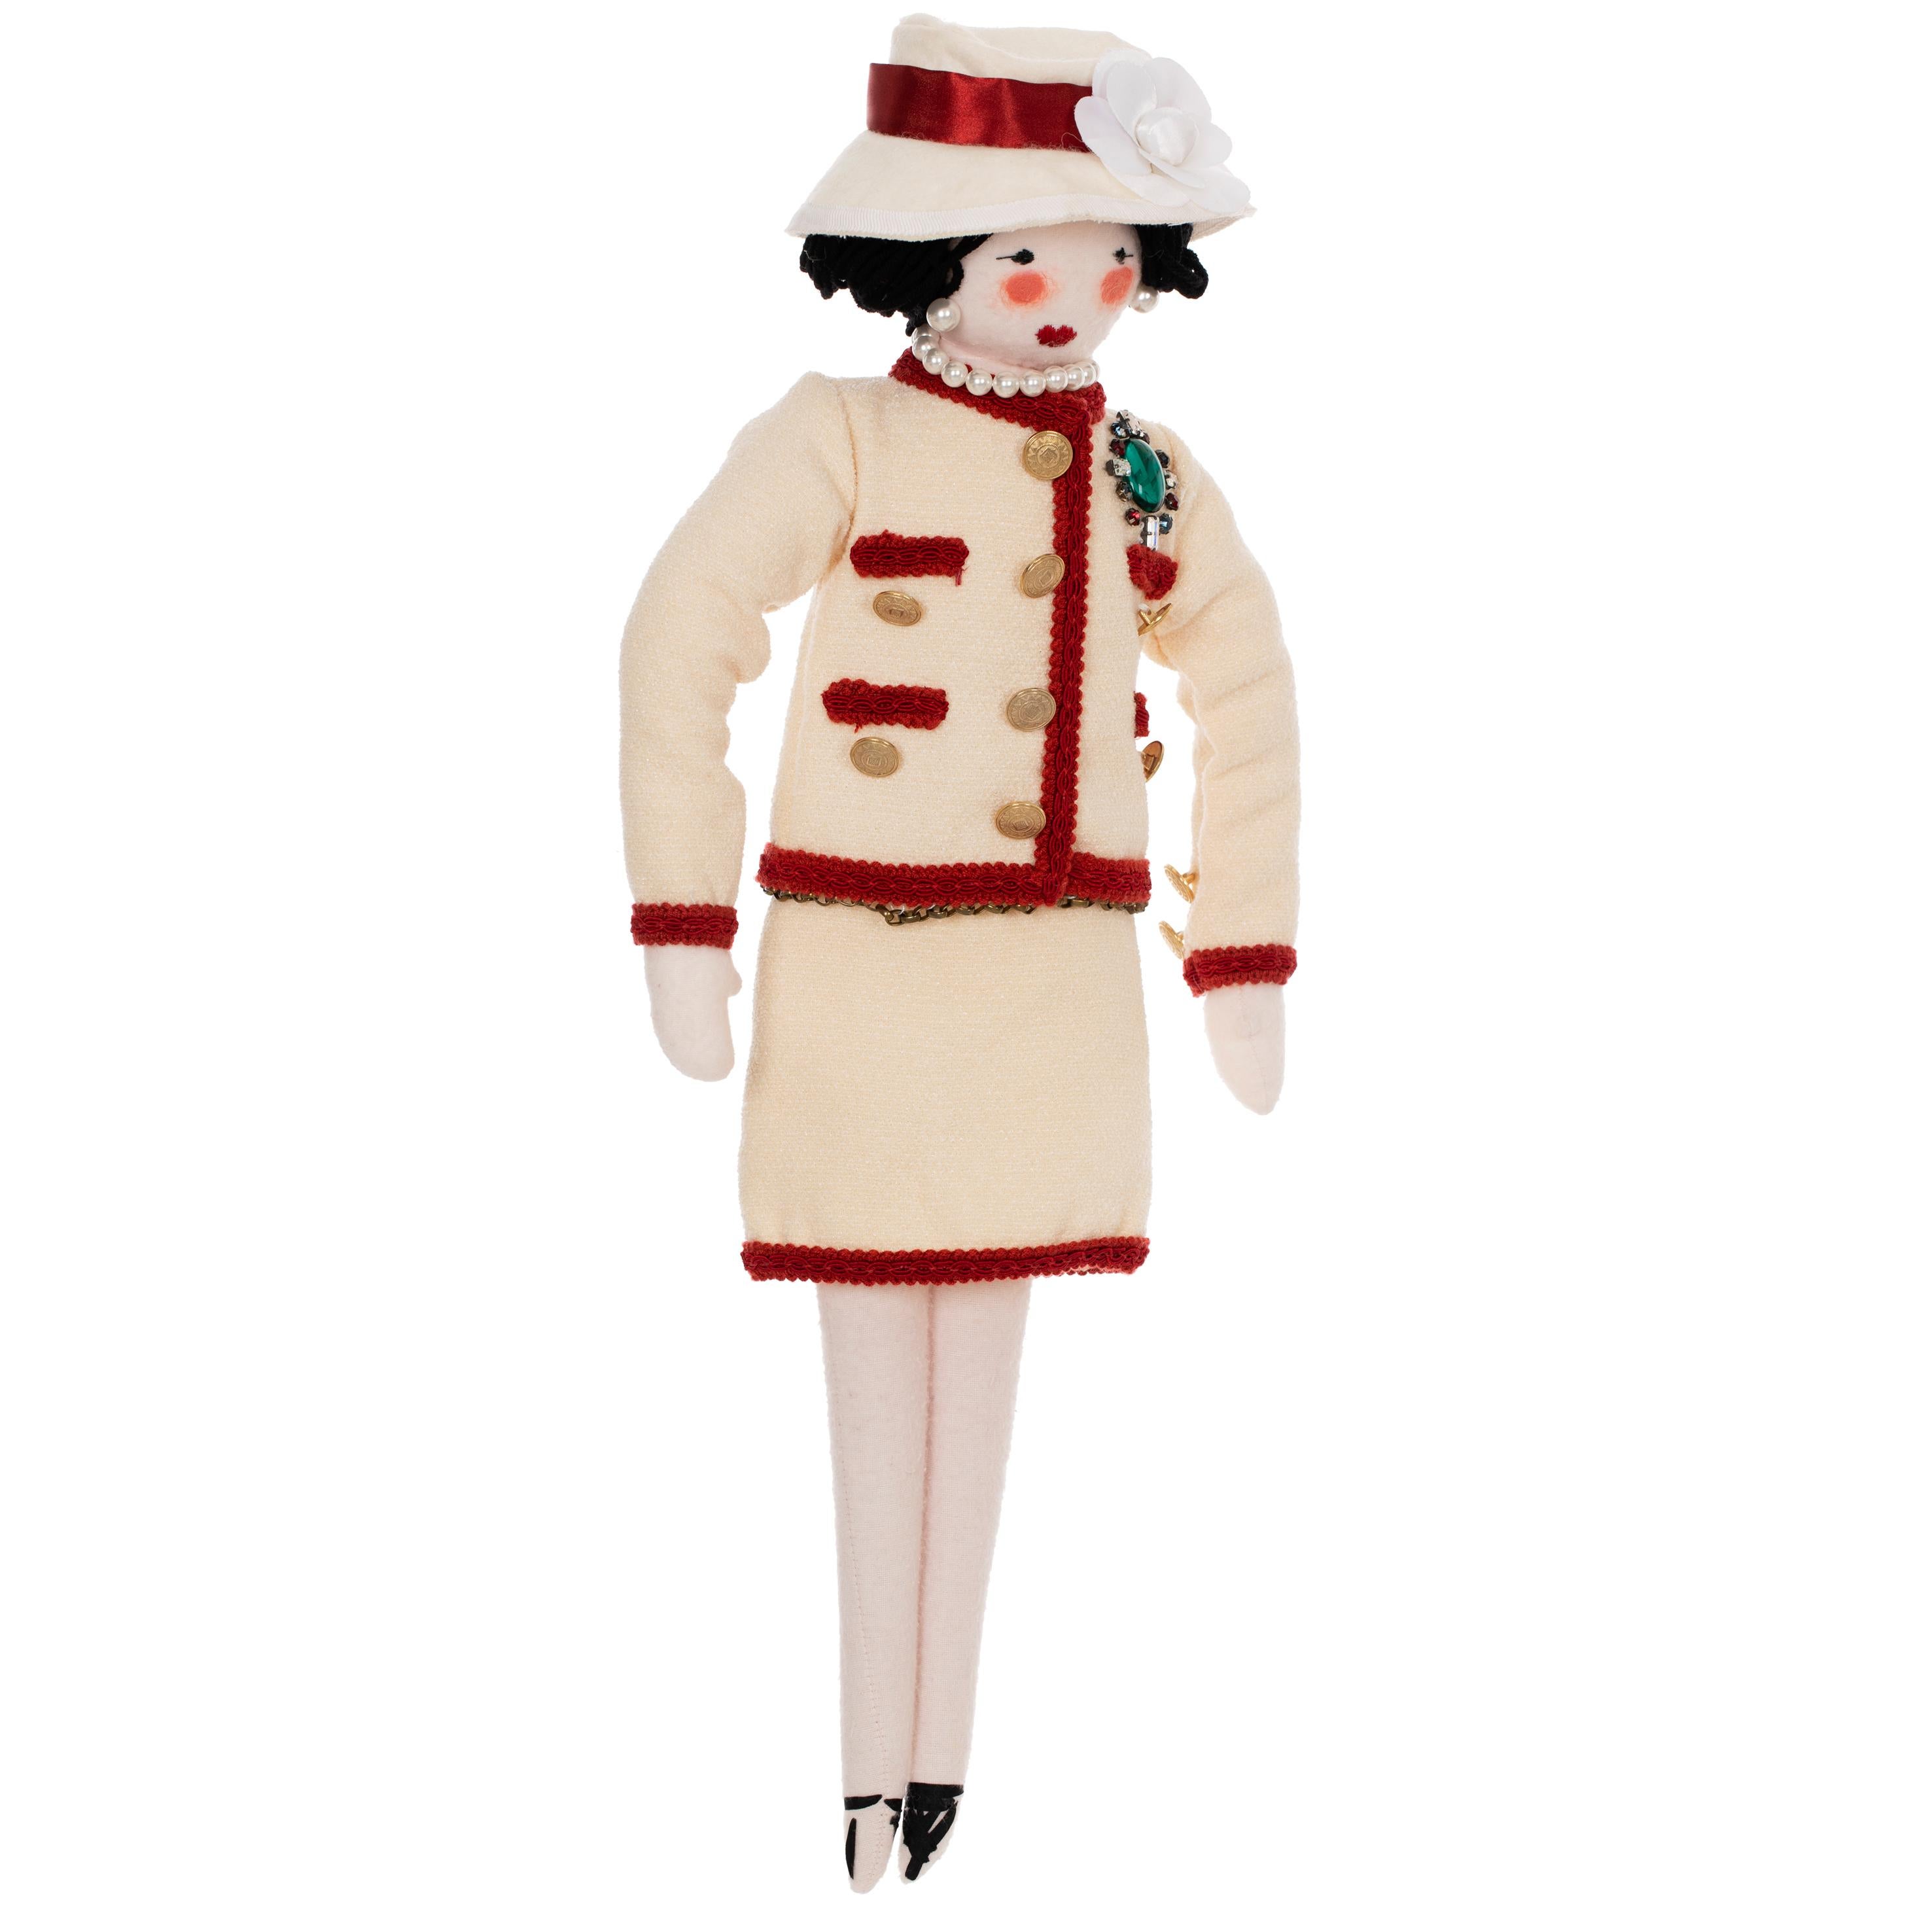 This classic Mademoiselle Coco rag doll from Chanel pays homage to the brand's founder, Gabrielle 'Coco' Chanel. Crafted from cotton fabric, the doll is dressed in a signature collarless skirt suit from the '60s that embodies the timeless elegance